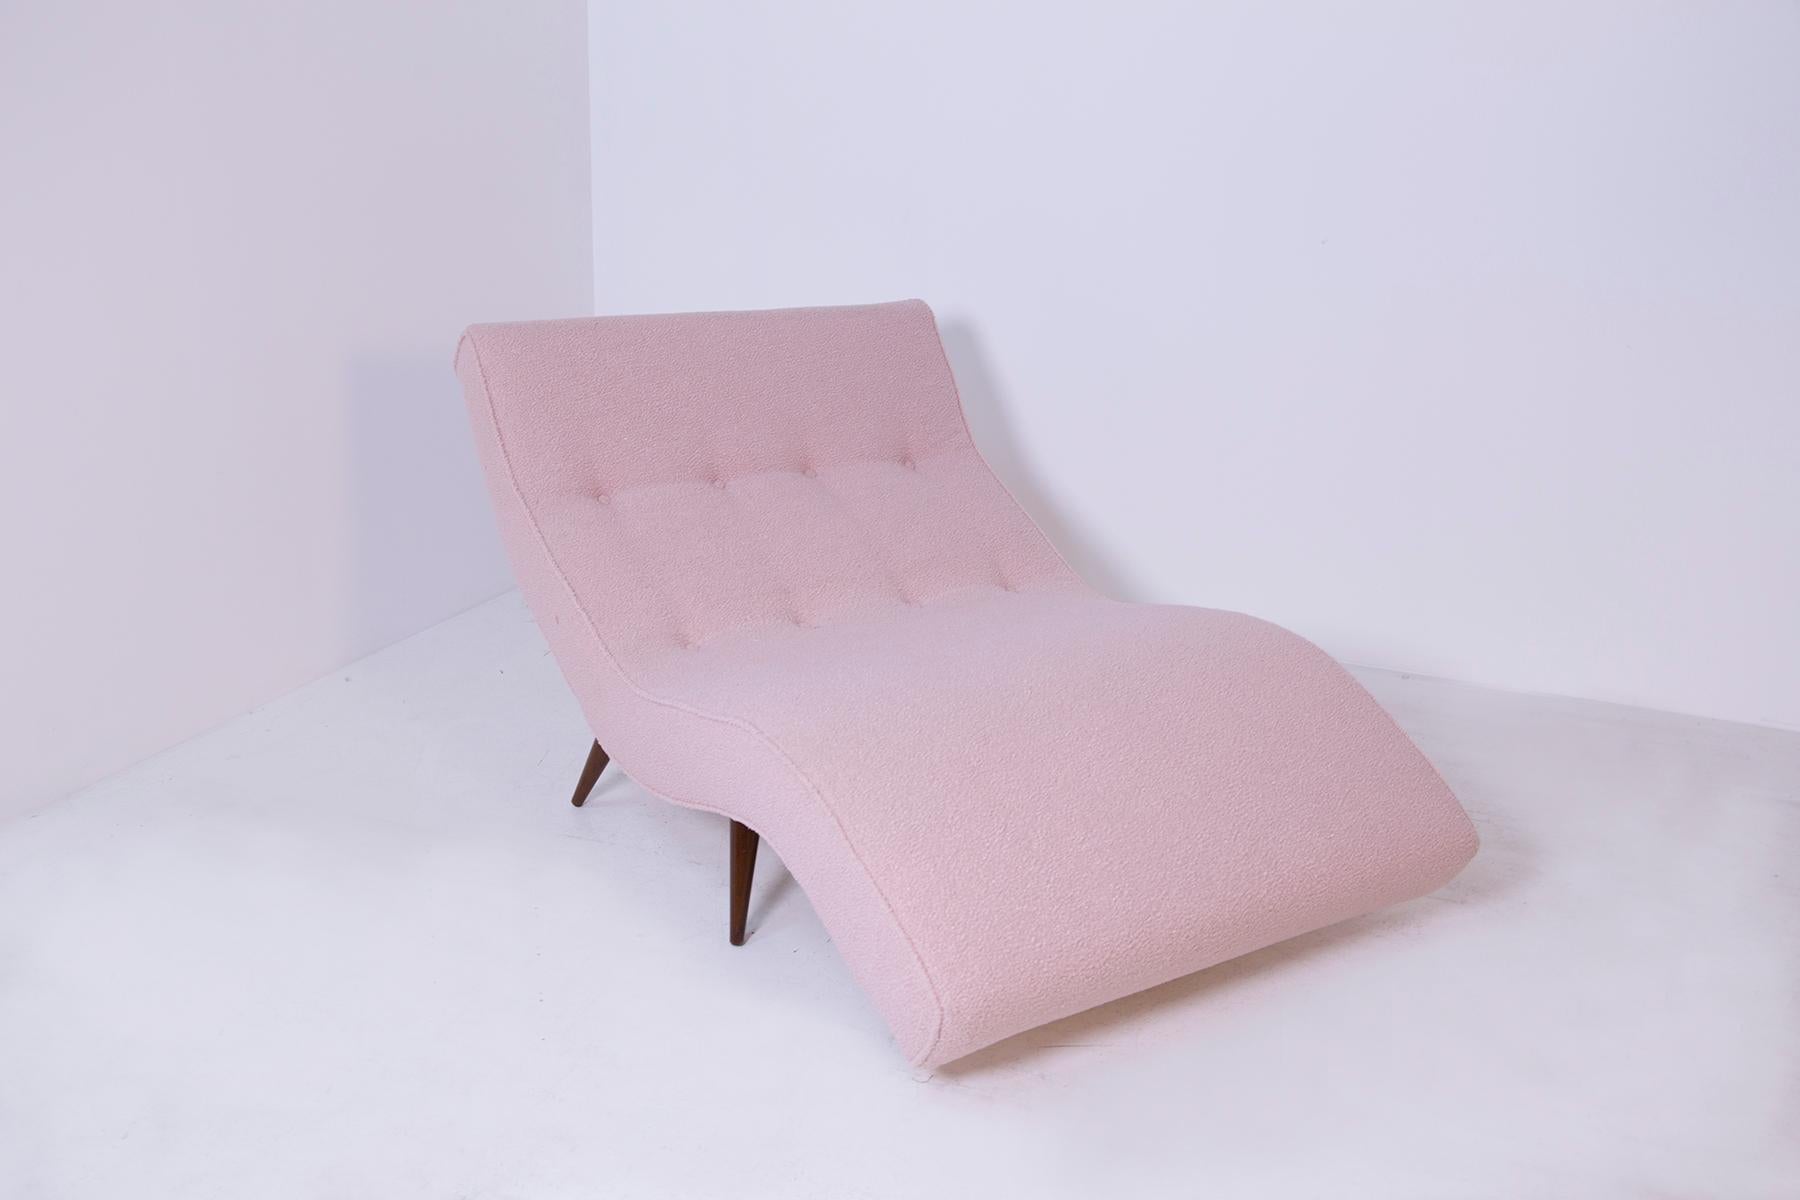 Elegant and comfortable American lounge chair from the 1950s.
The lounge chair has been refreshed in pink bouclé. Its perfectly conical feet give elegance and stability to the seat. The comfort of the seat is given by the wave line where the body